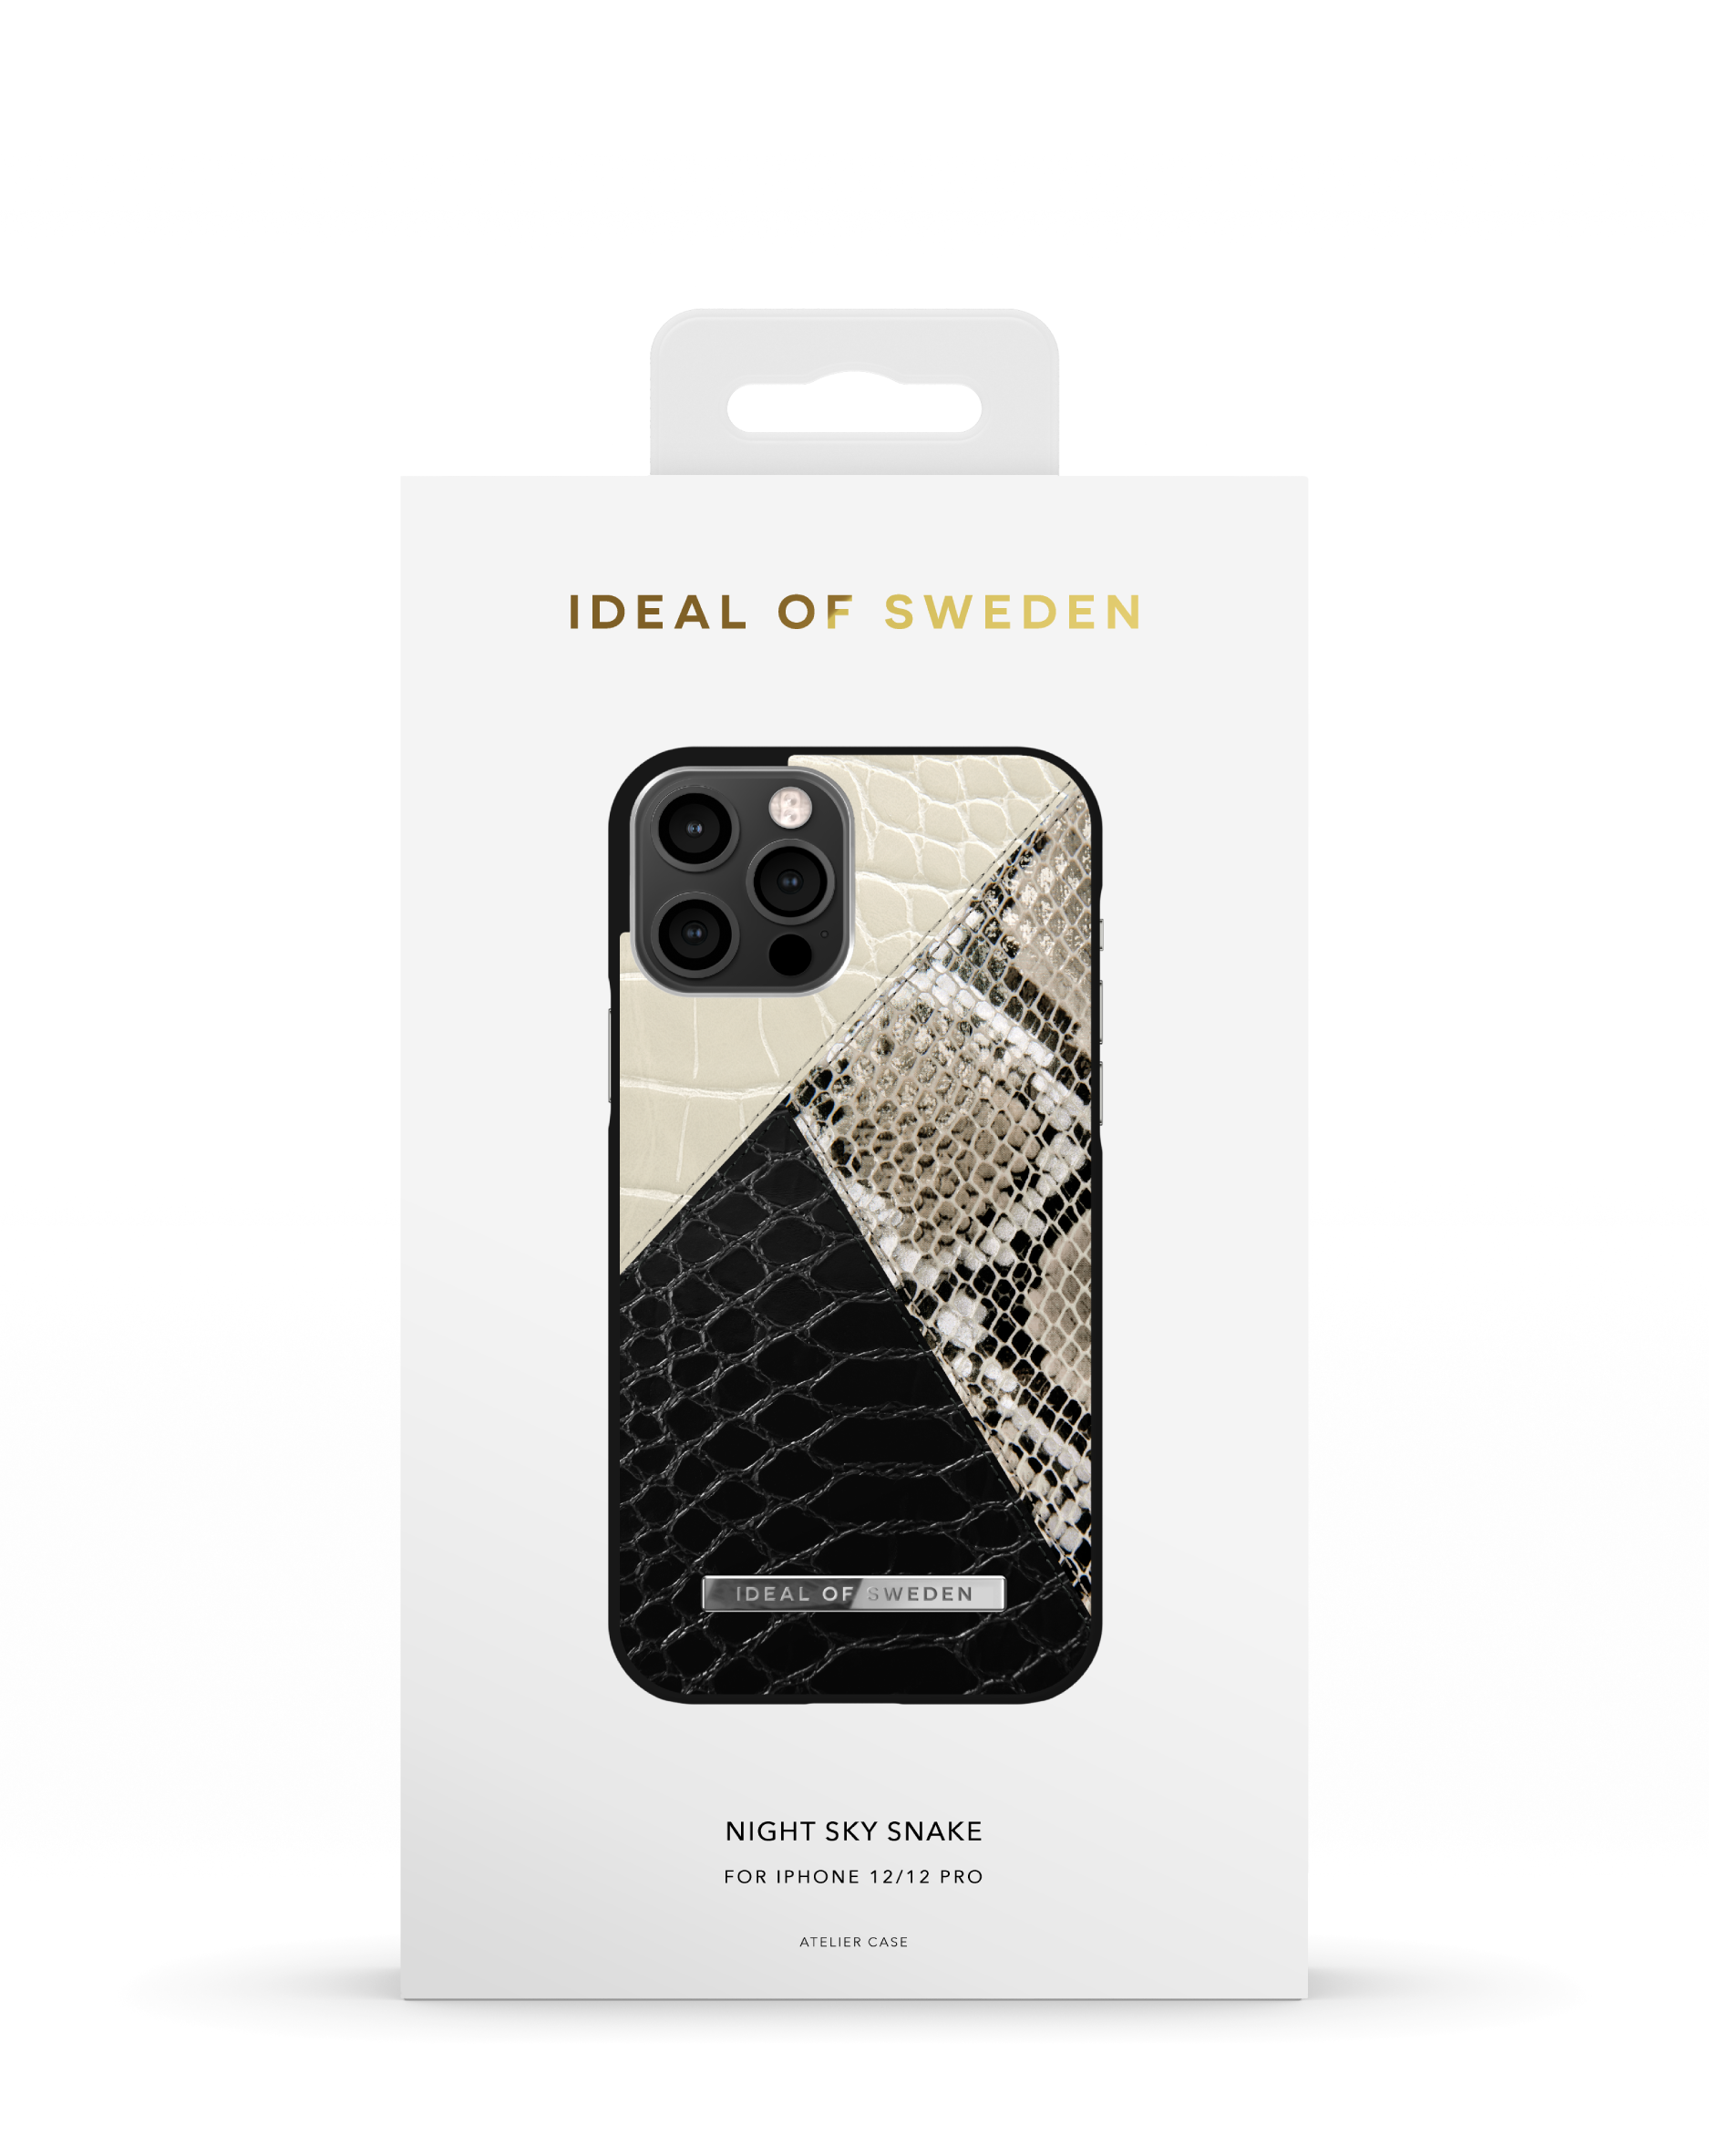 IDEAL OF Backcover, iPhone Apple SWEDEN Apple, Pro, Apple iPhone Sky 12 IDACSS21-I2061-271, 12, Night Snake